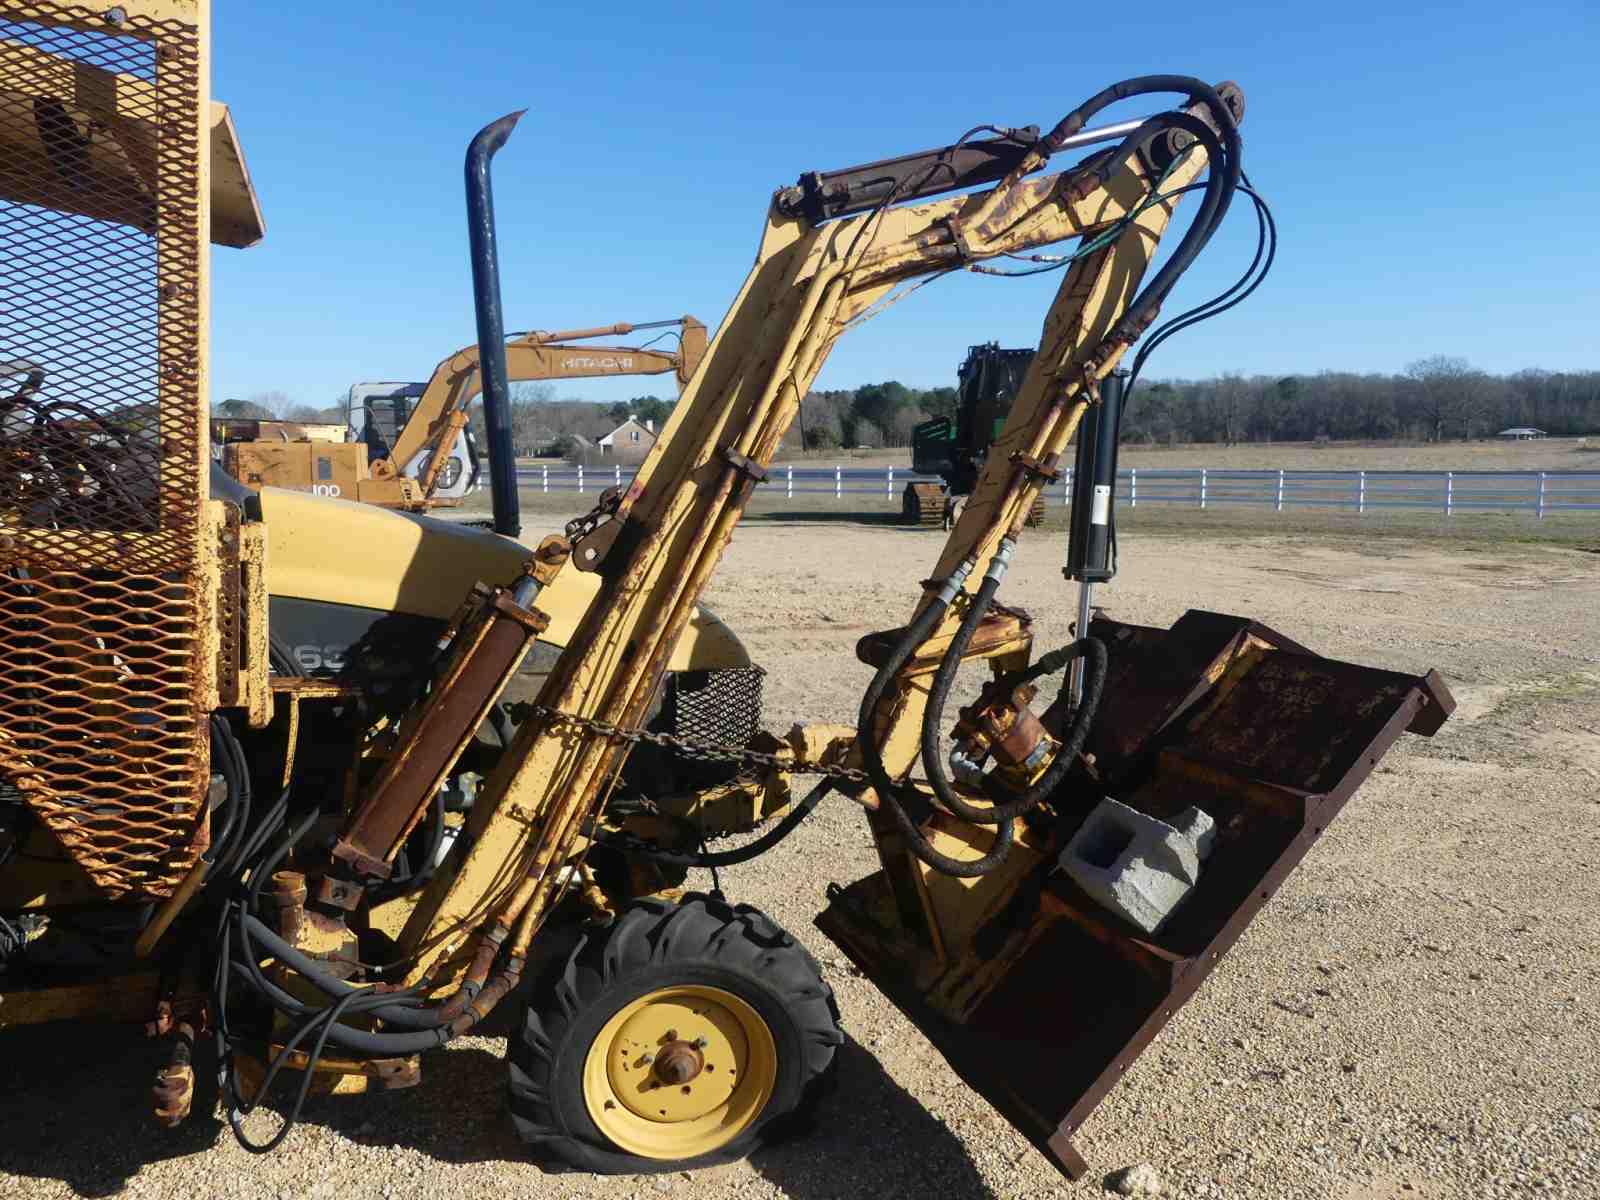 Ford 6635 MFWD Tractor, s/n 001111883 (Salvage): w/ Tiger Side Boom Mower,